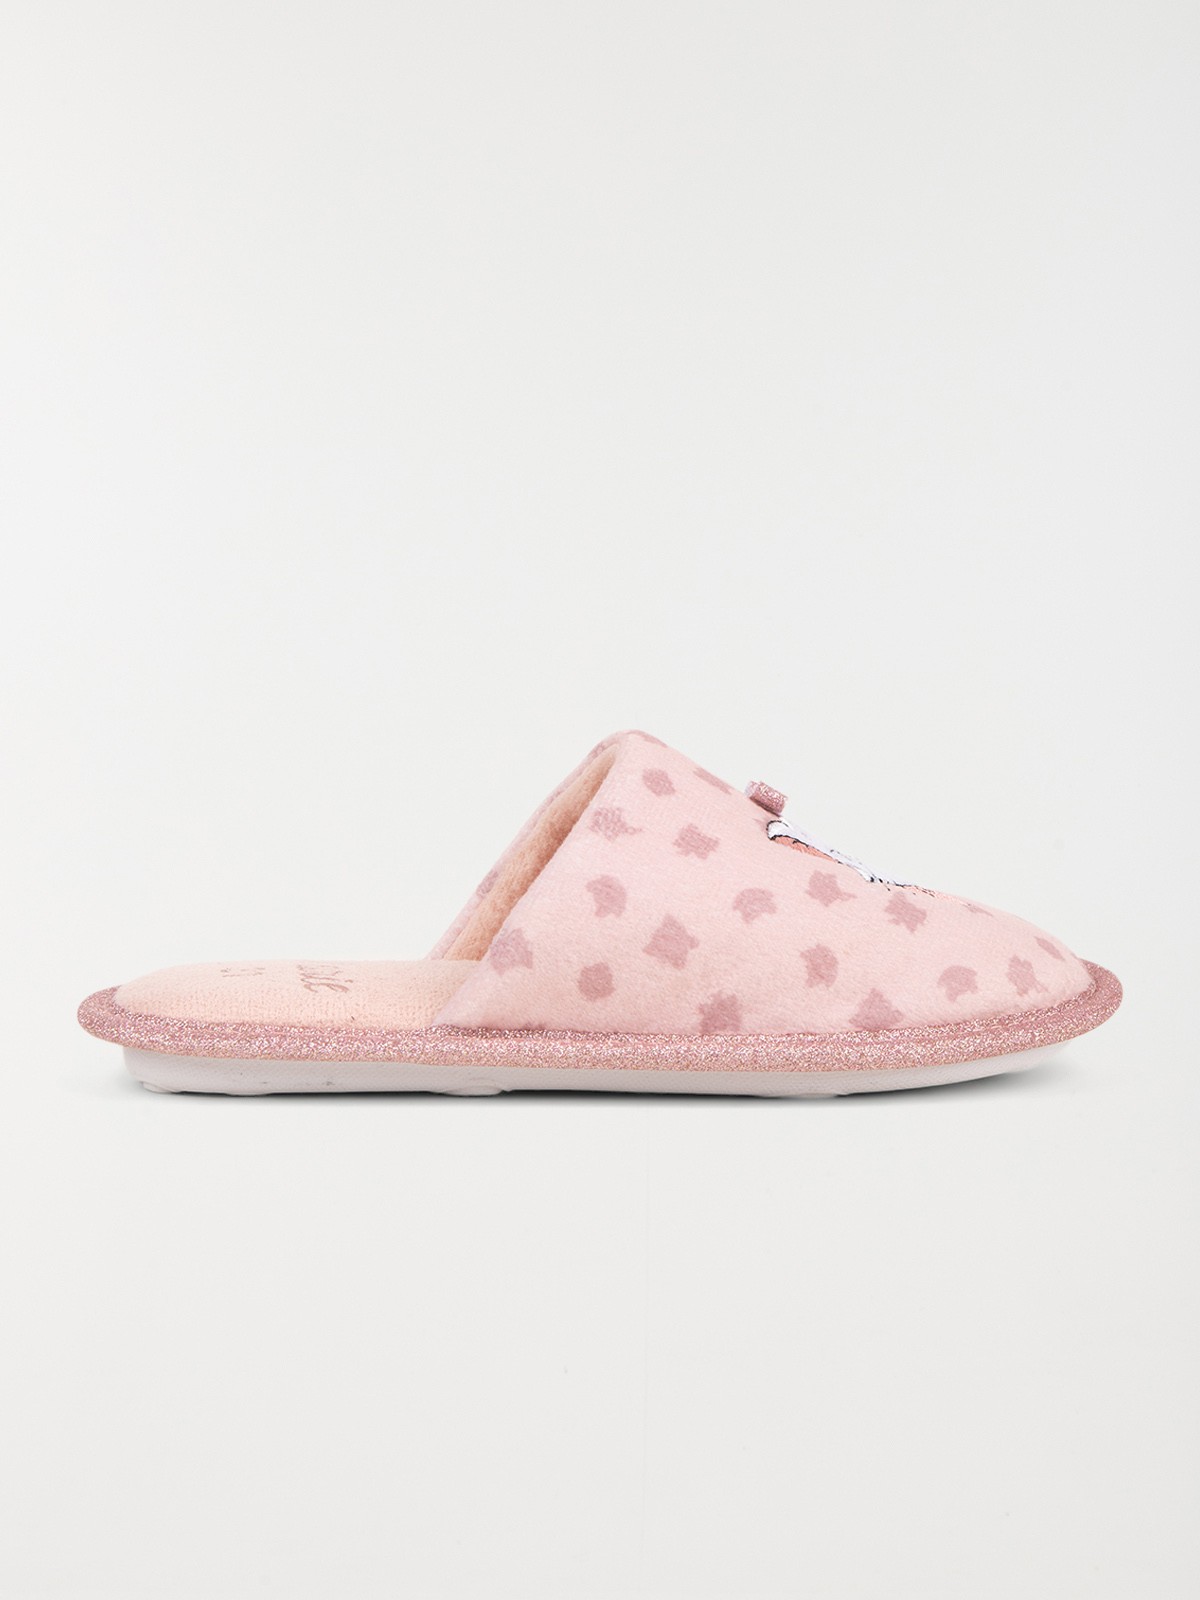 Chaussons Aristochats fille (31-35) - DistriCenter